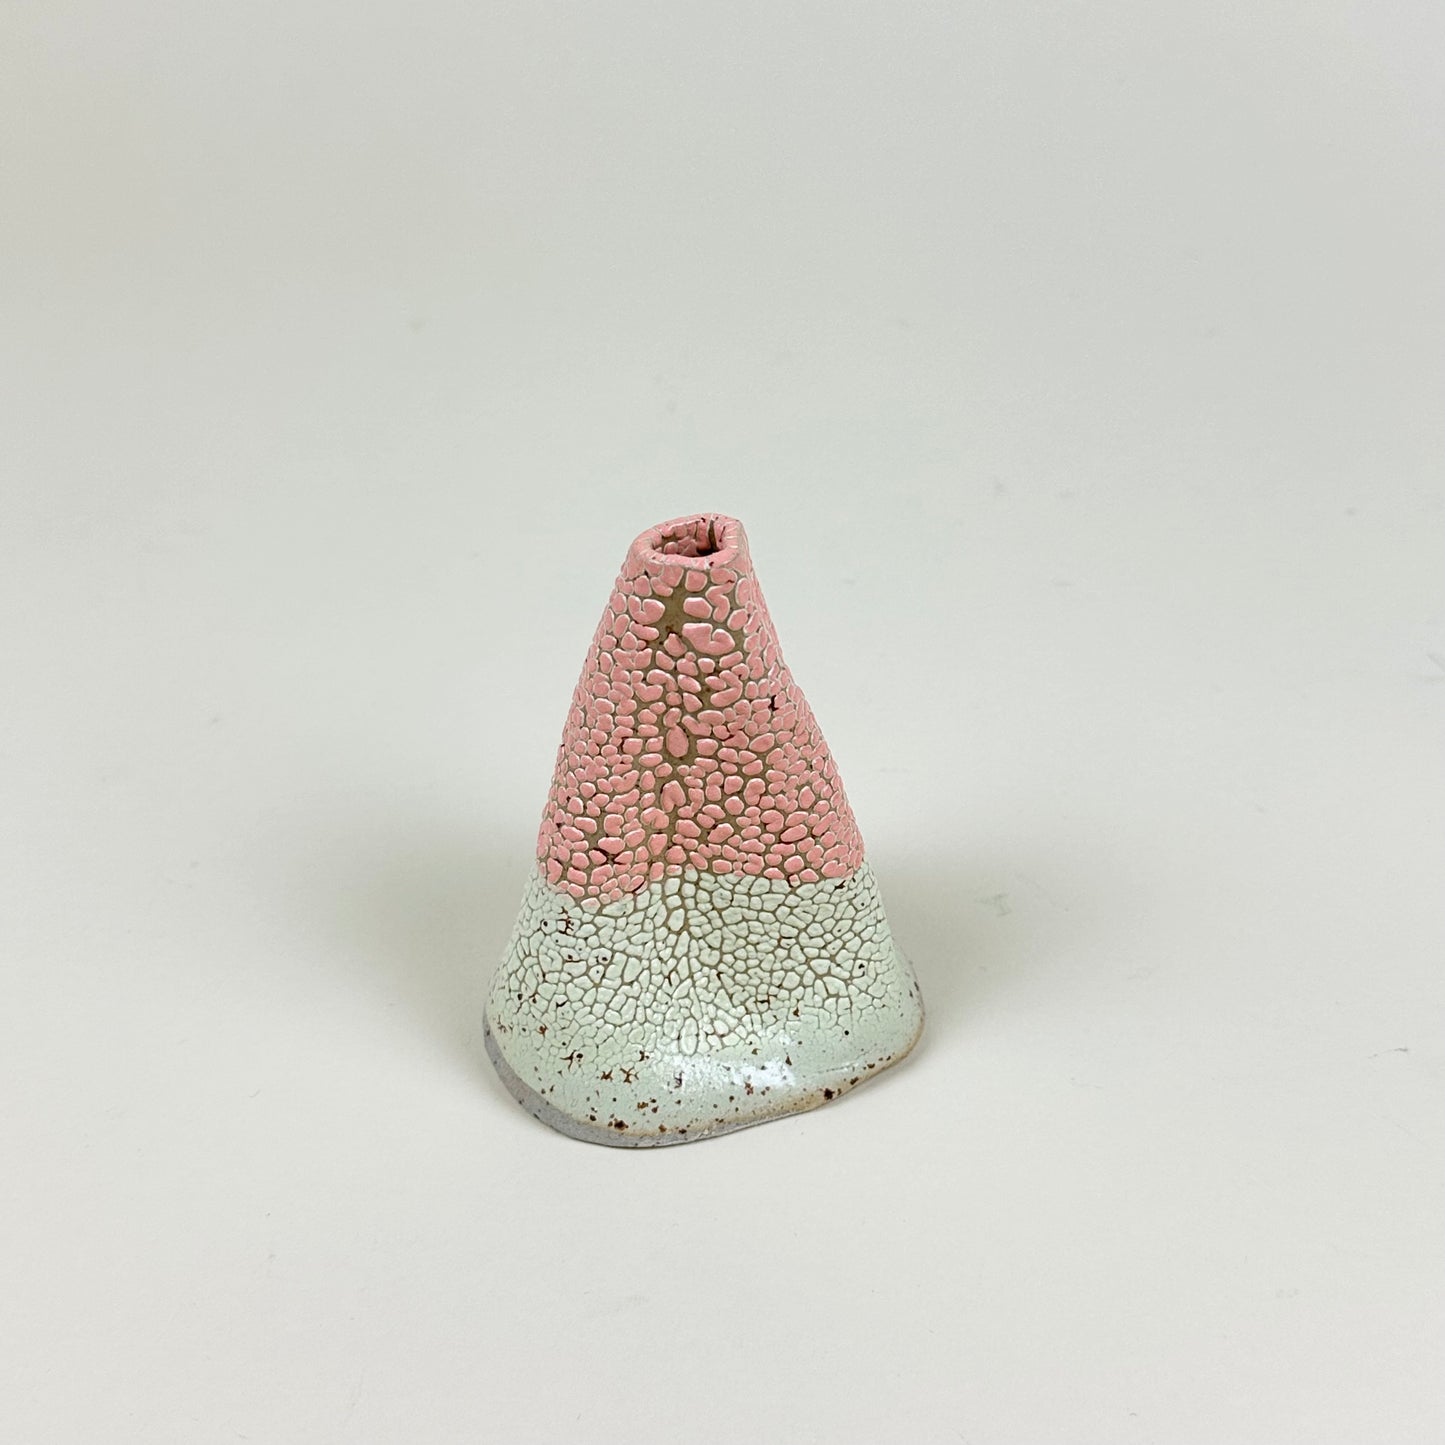 Pink and light yellow volcano vase (S) by Astrid Öhman.